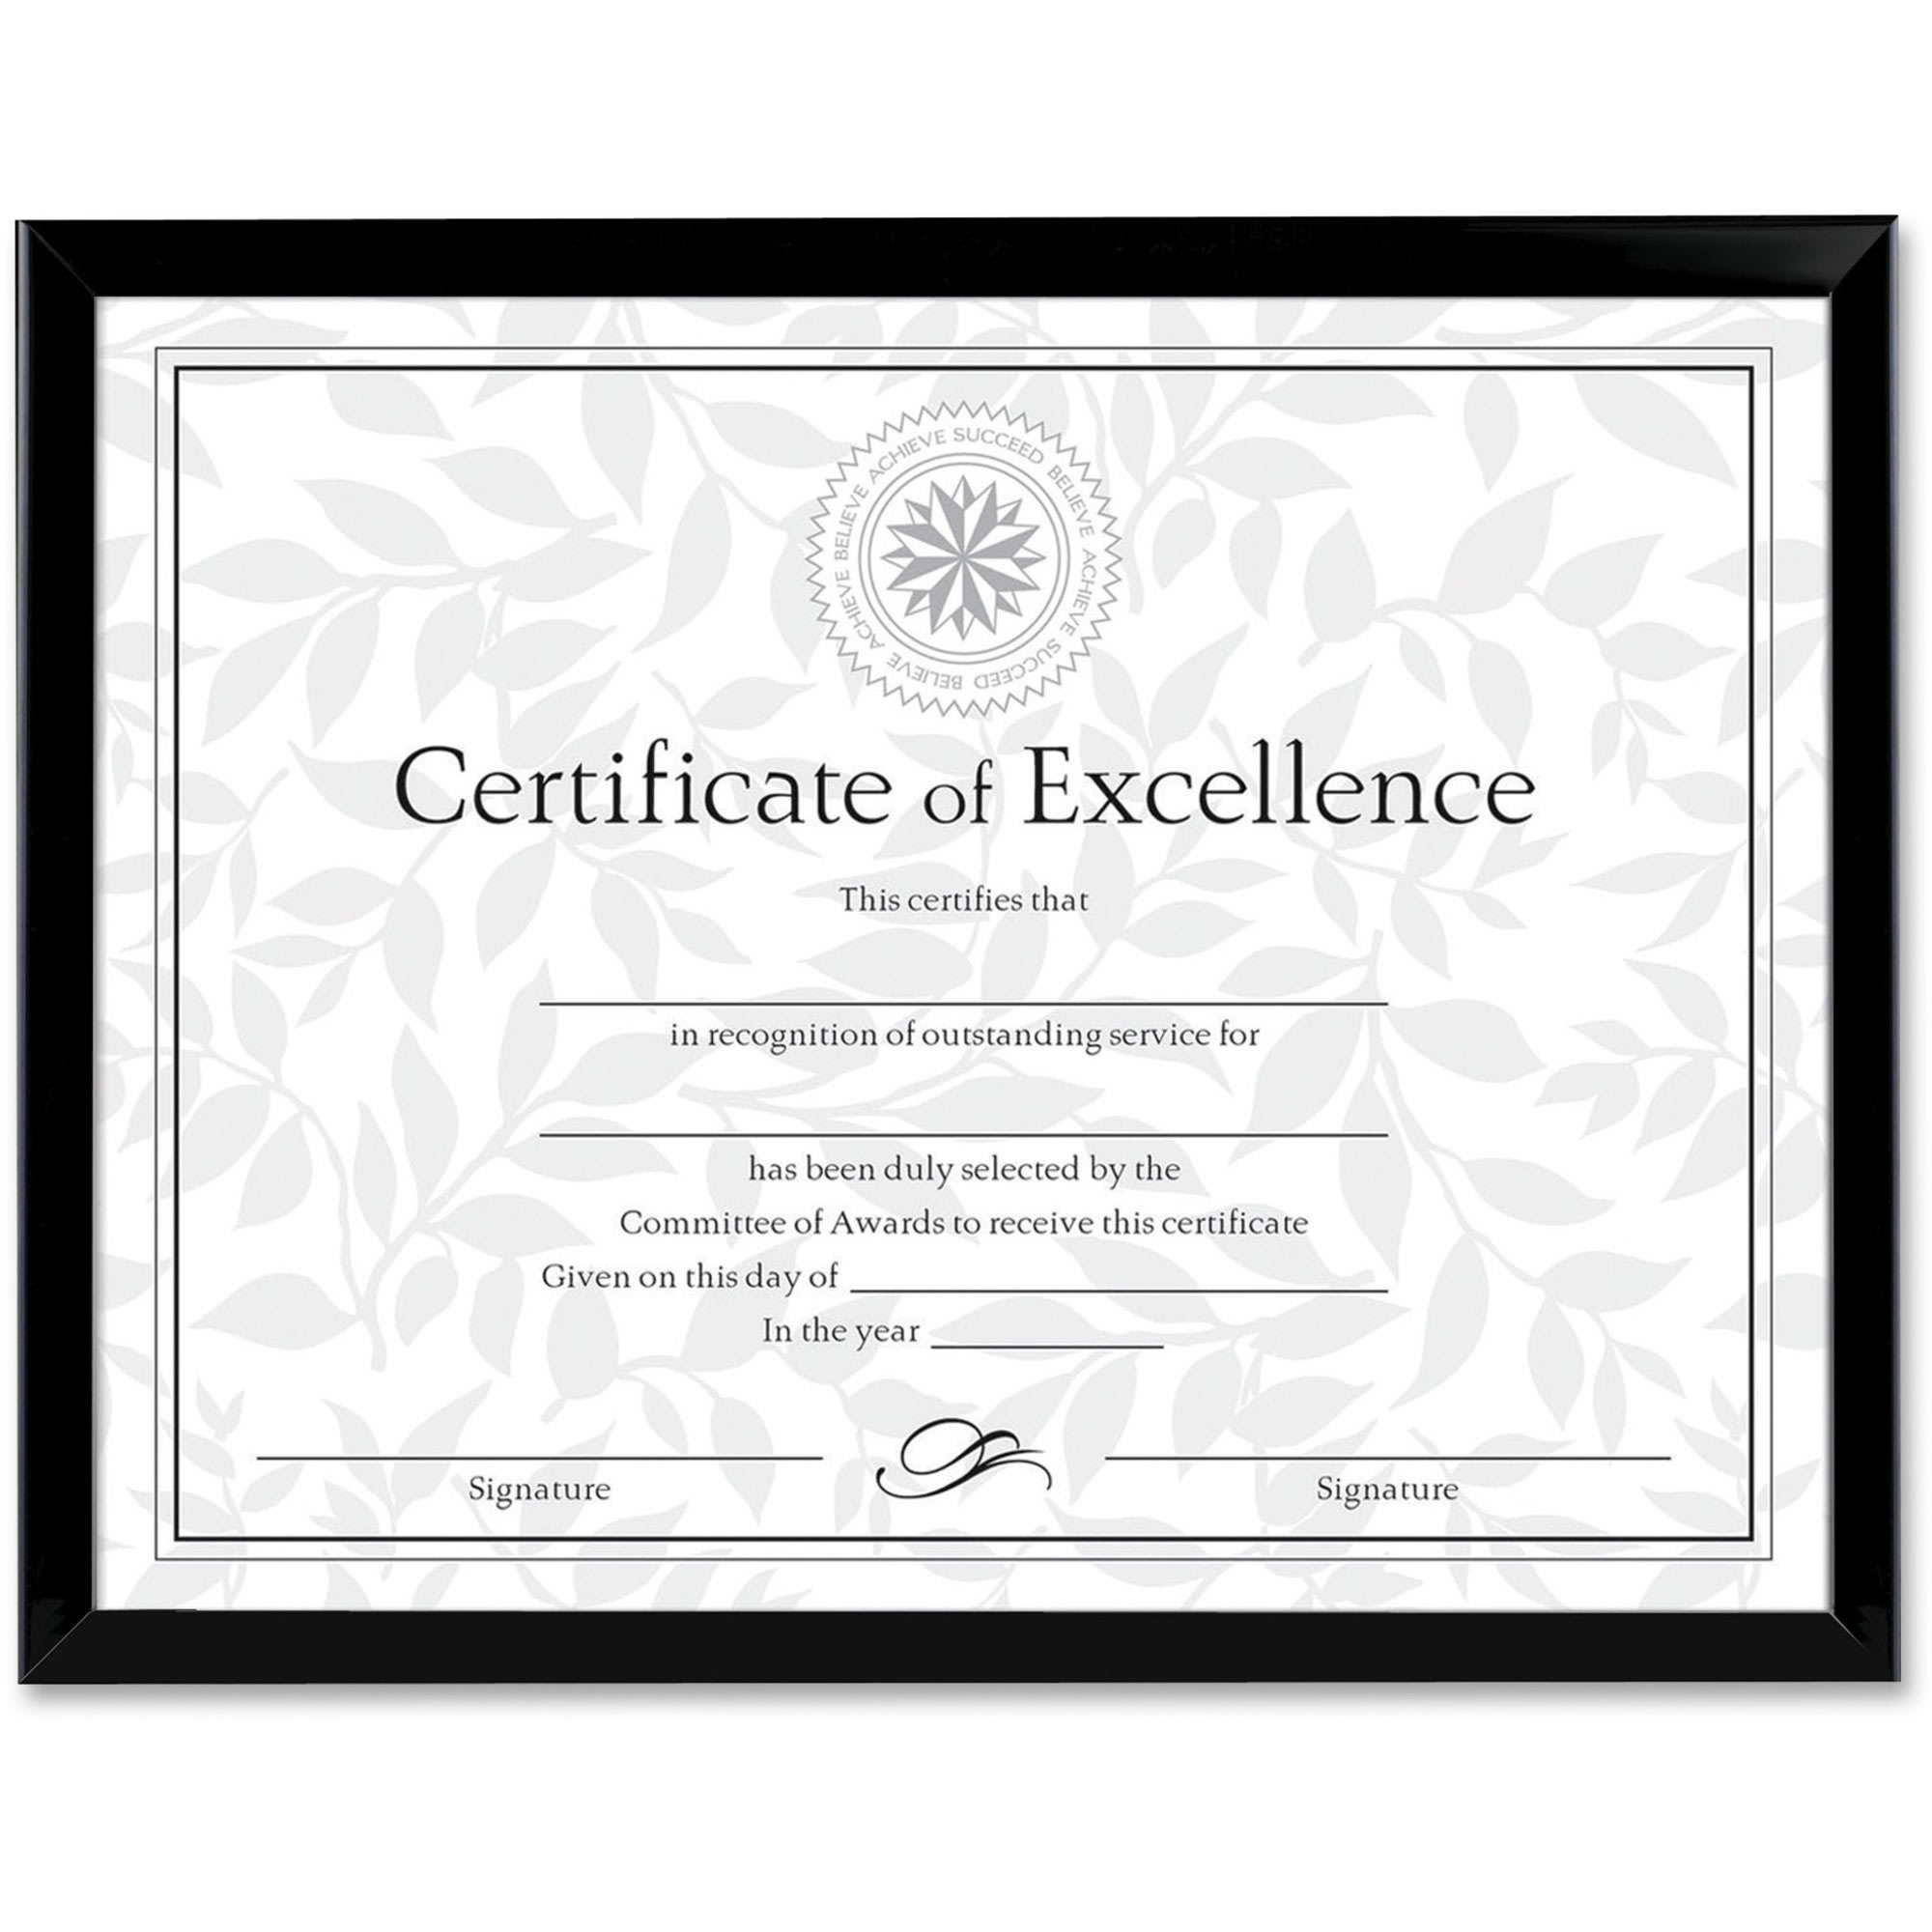 DAX Value U-Channel Document Frames With Certificates, 8.5x11, Black, Set of 2 - image 1 of 2